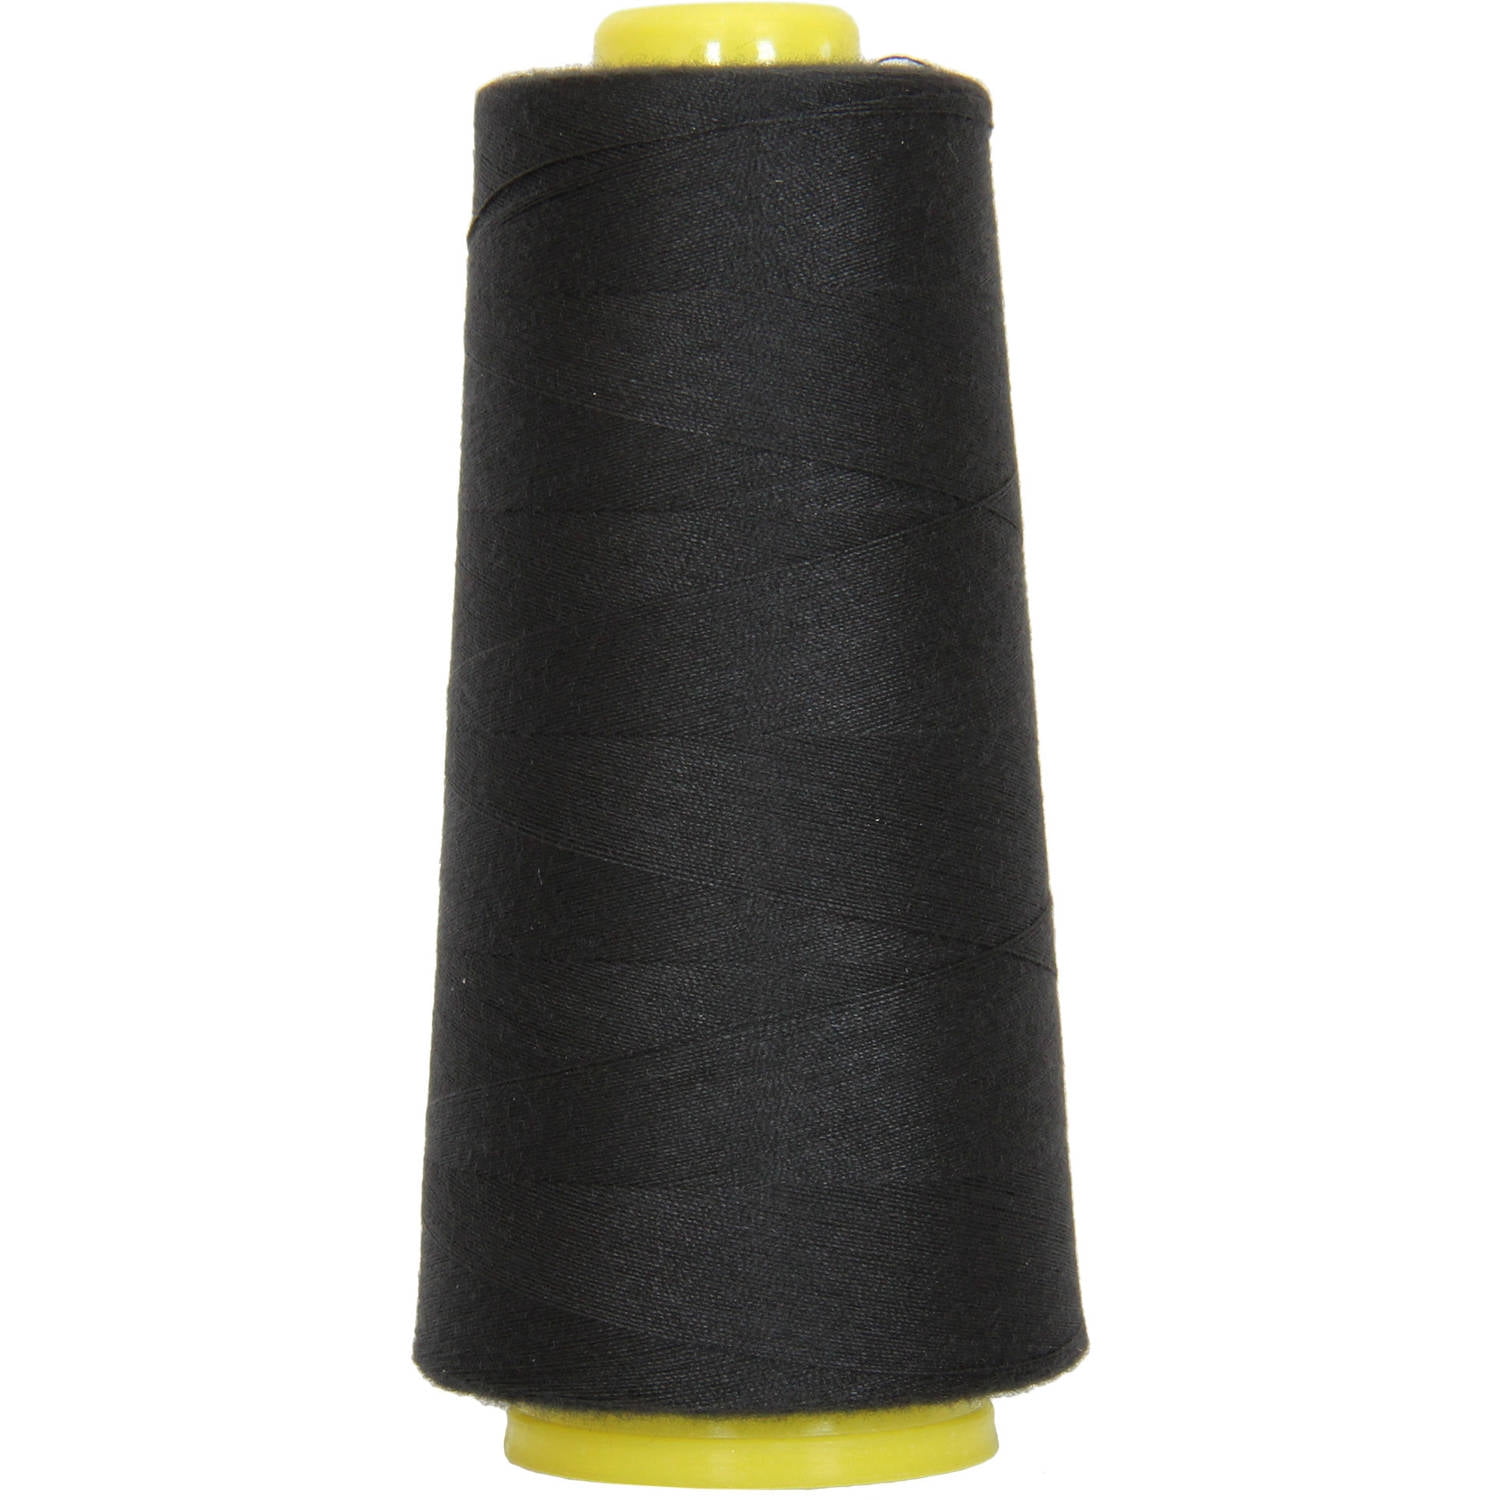 Extra Strong Polyester Upholstery Thread 100m - Black - 724032-000